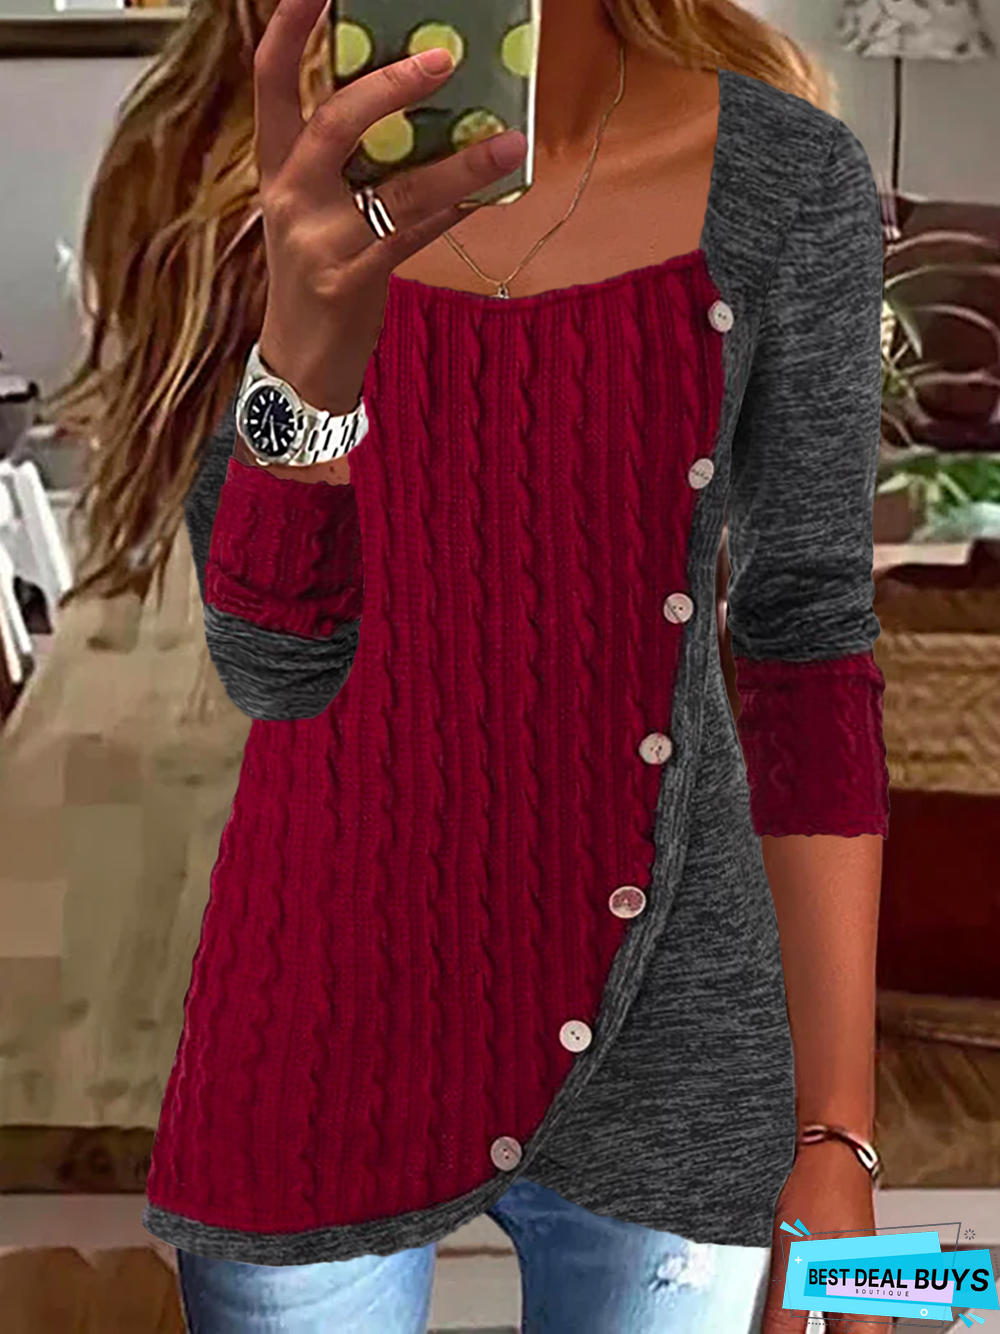 Christmas Casual Buttoned Long Sleeve Tunic Top